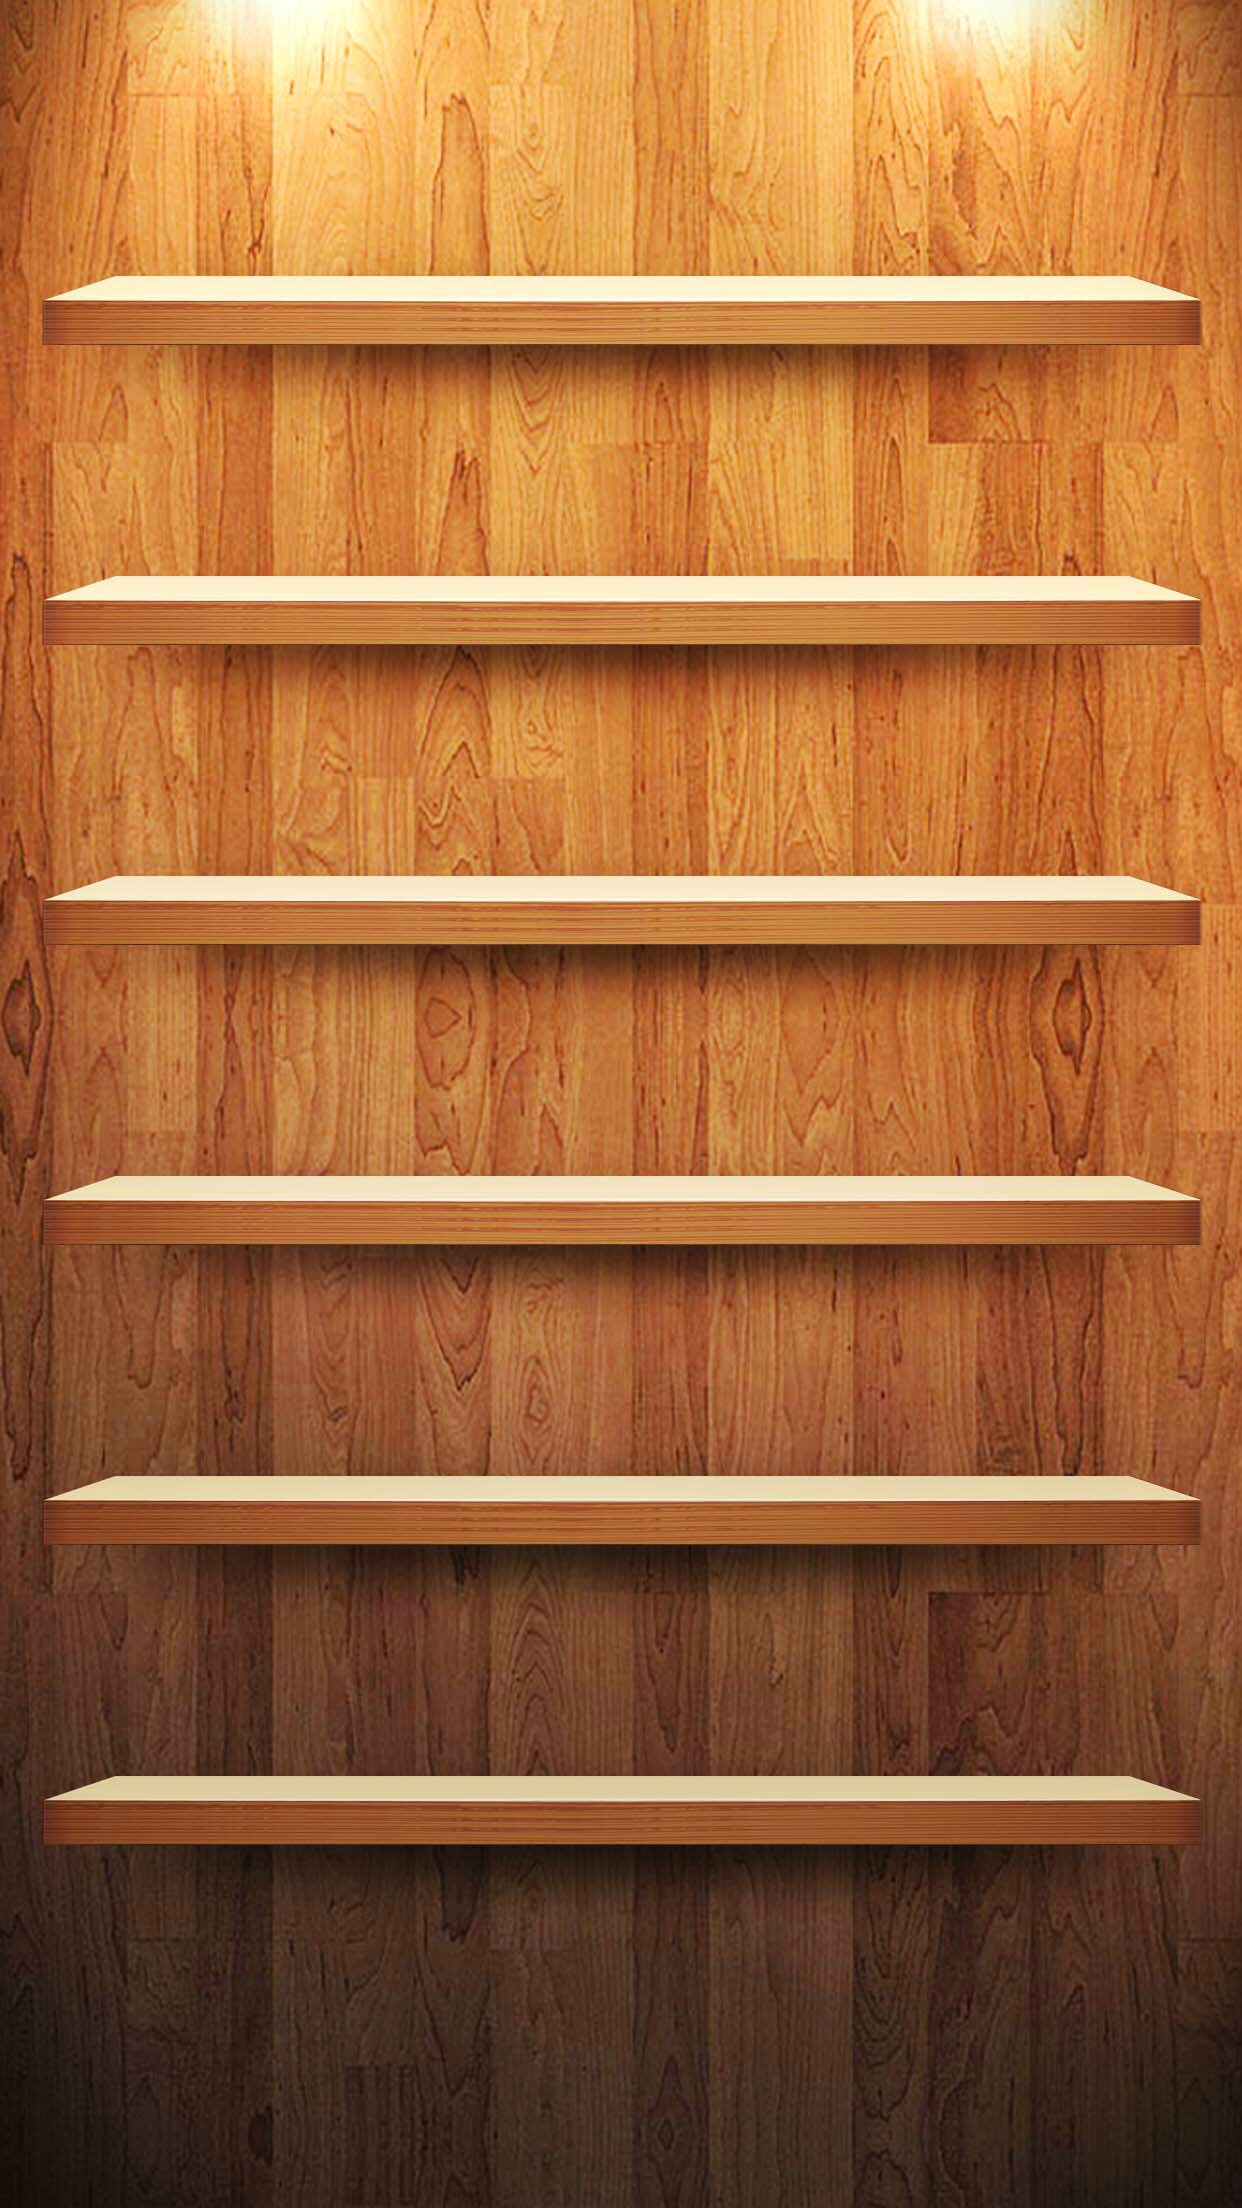 10 Creative Shelves Wallpapers for the iPhone 6 Plus! - Album on Imgur